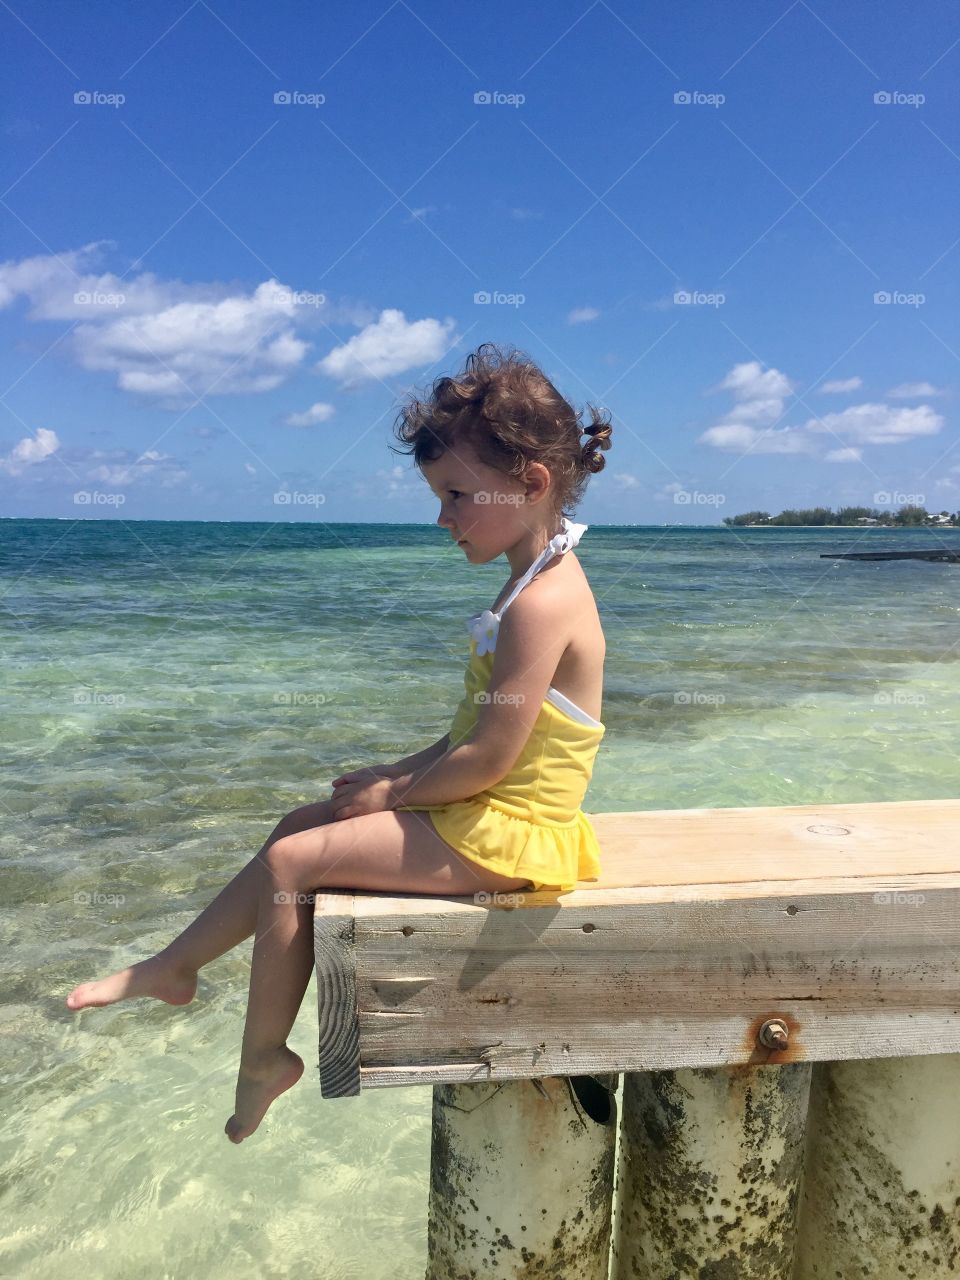 Peacefully daydreaming on a beautiful day in Grand Cayman at Starfish point.